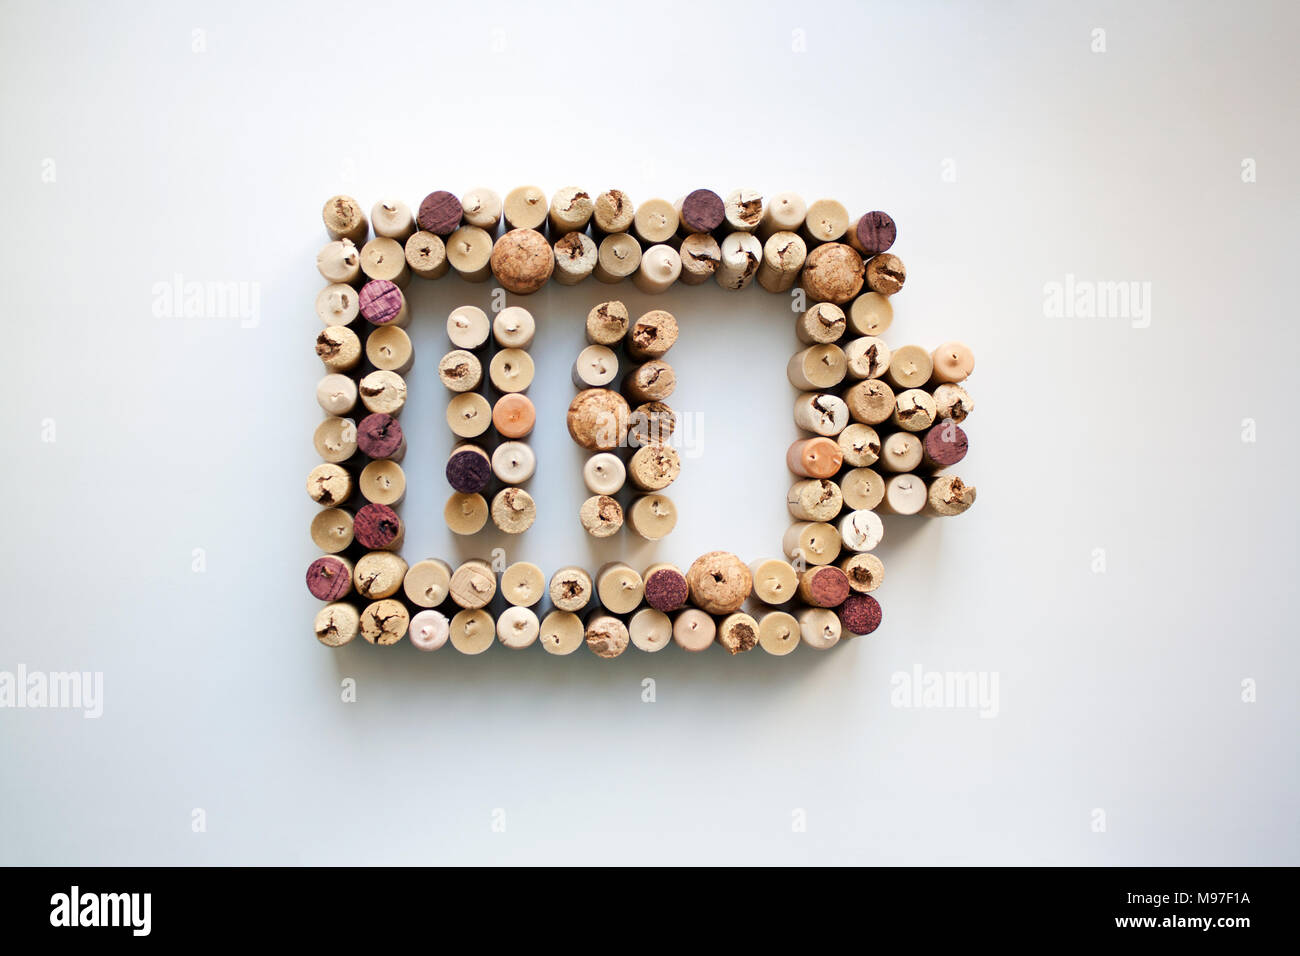 Wine corks battery charge level abstract composition isolated on white from a high angle view Stock Photo